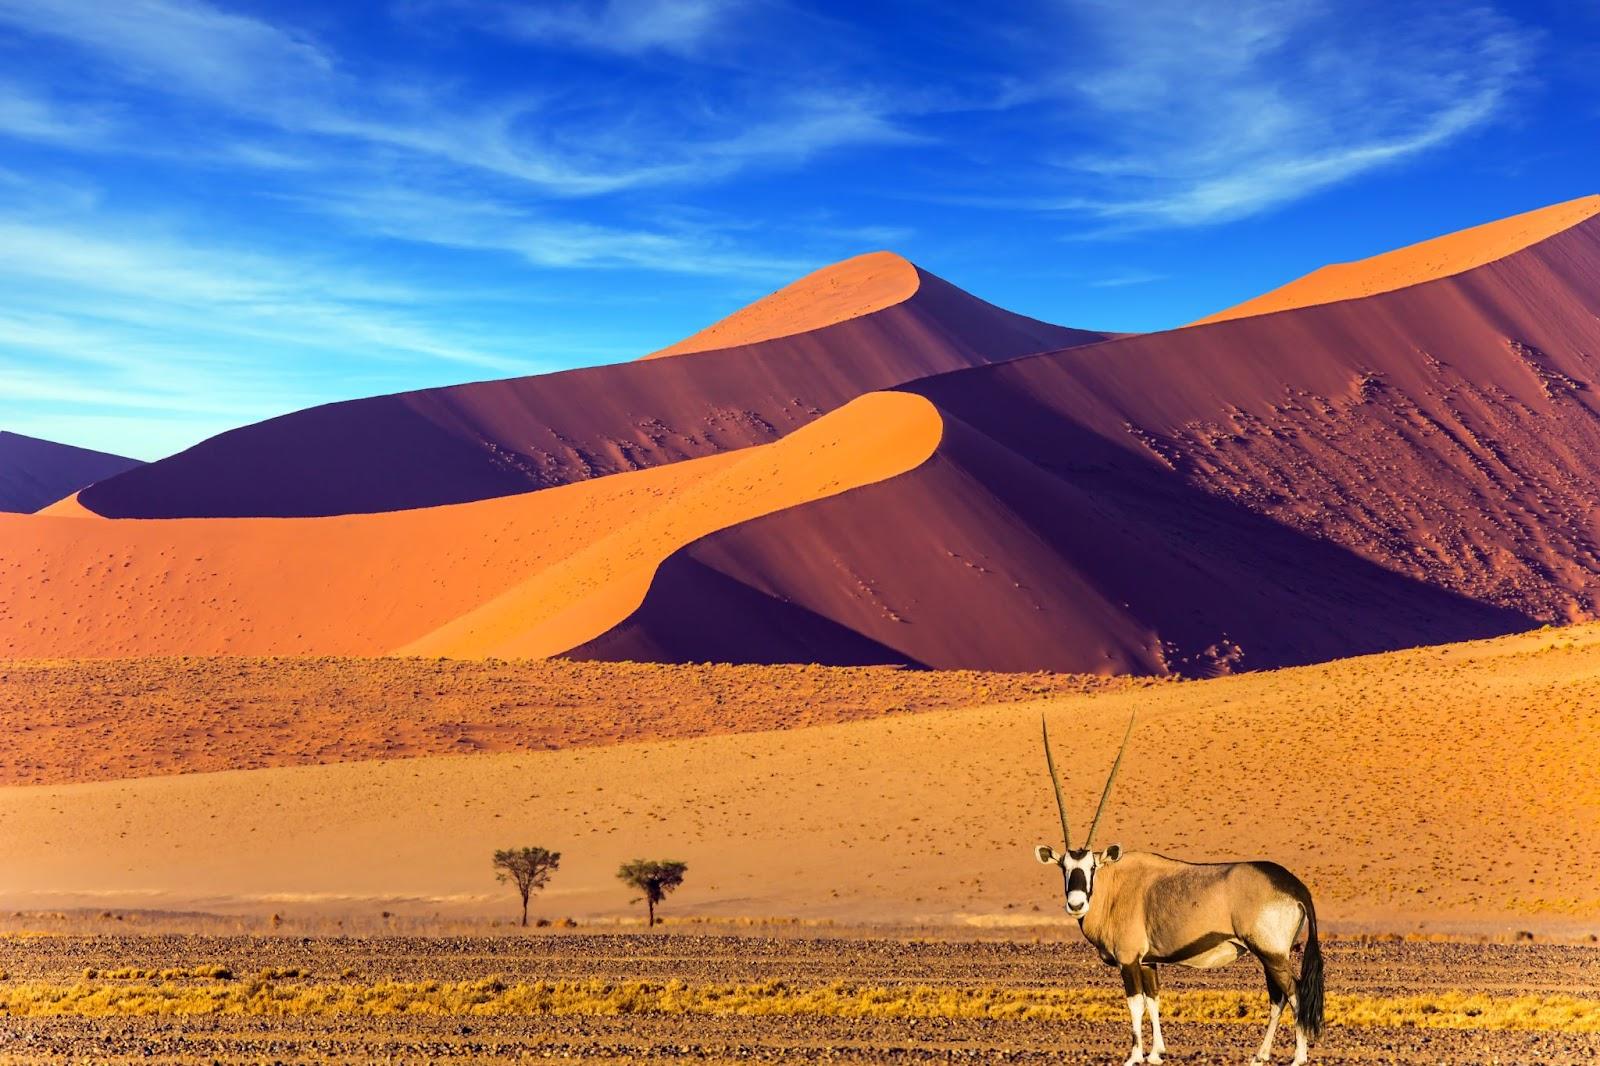 Sunset in Namib Desert. Oryx standing at the road